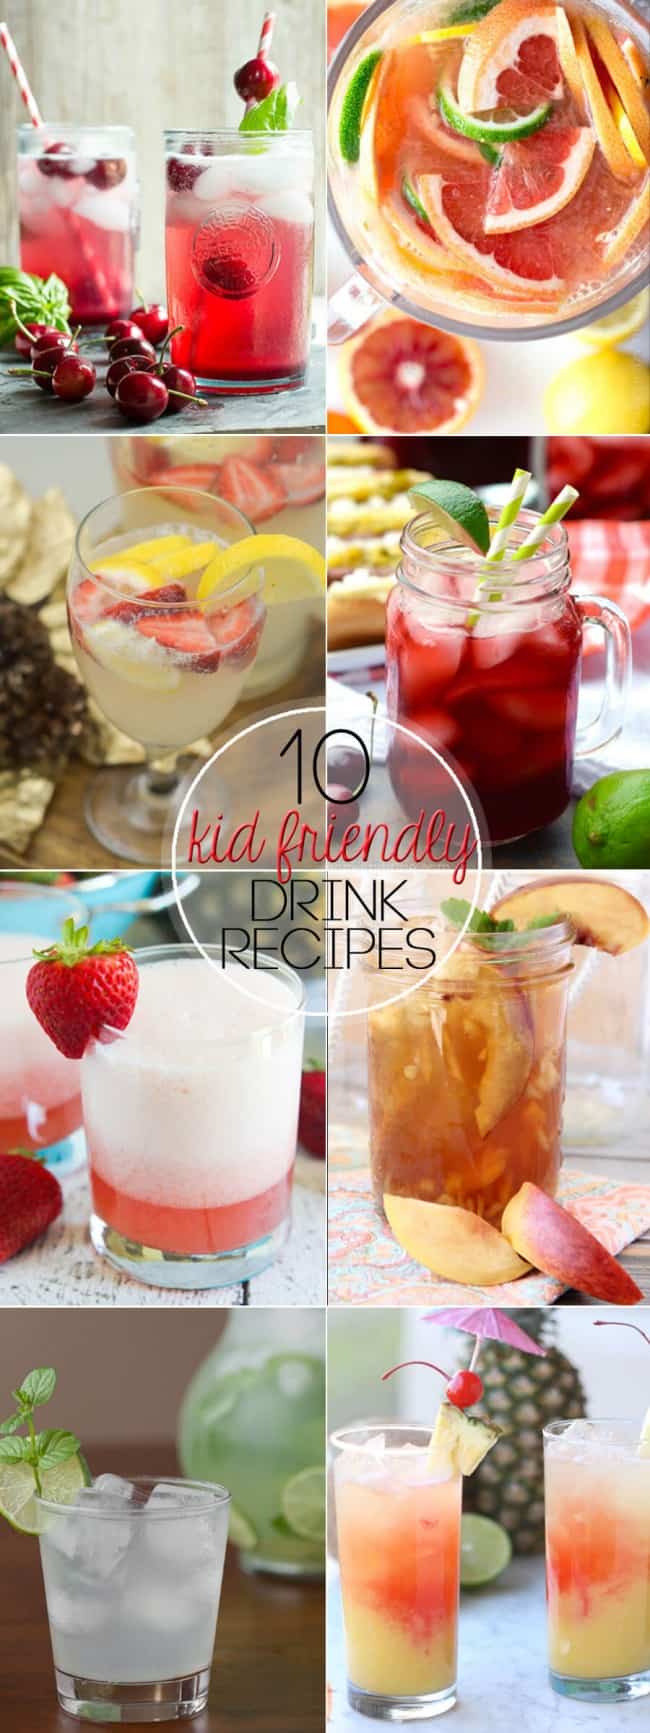 10 Kid Friendly Drink Recipes For Summer,Feng Shui Bedroom Placement